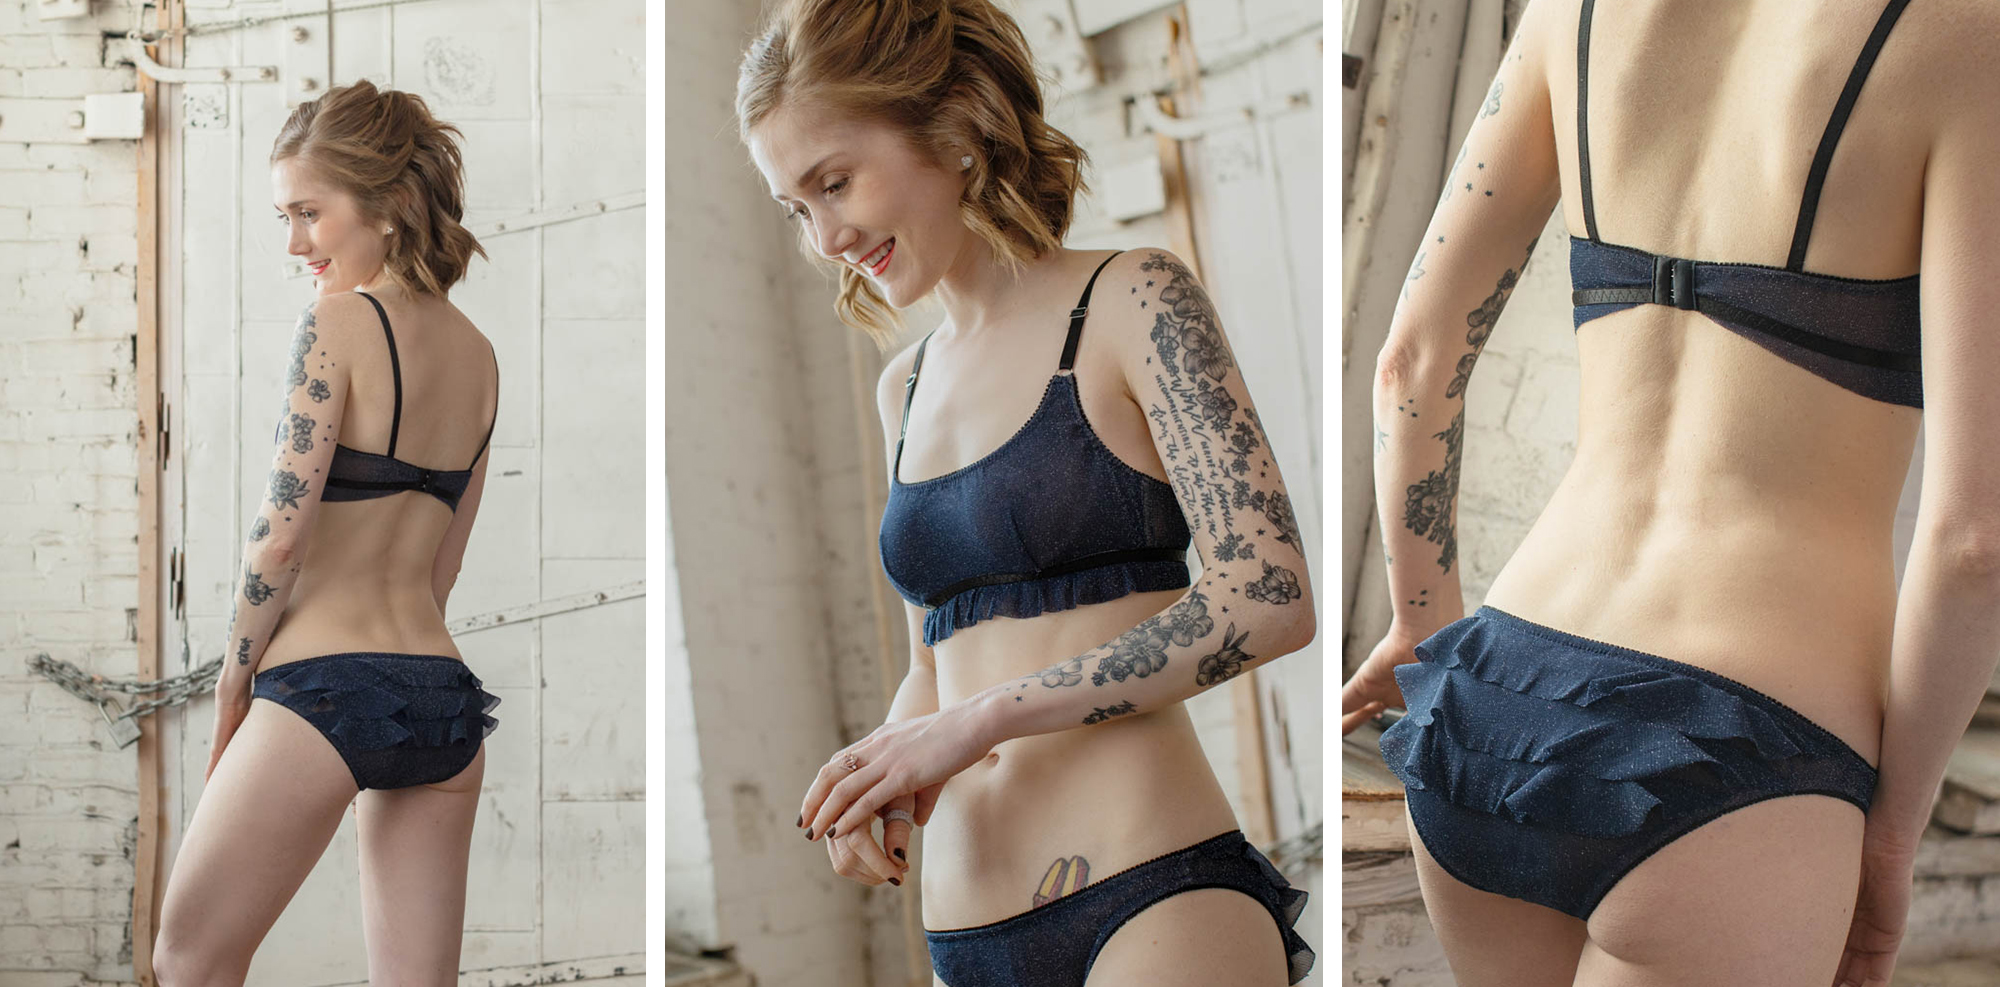 Madalynne X Simplicity Lingerie Sewing Patterns by Madalynne Intimates